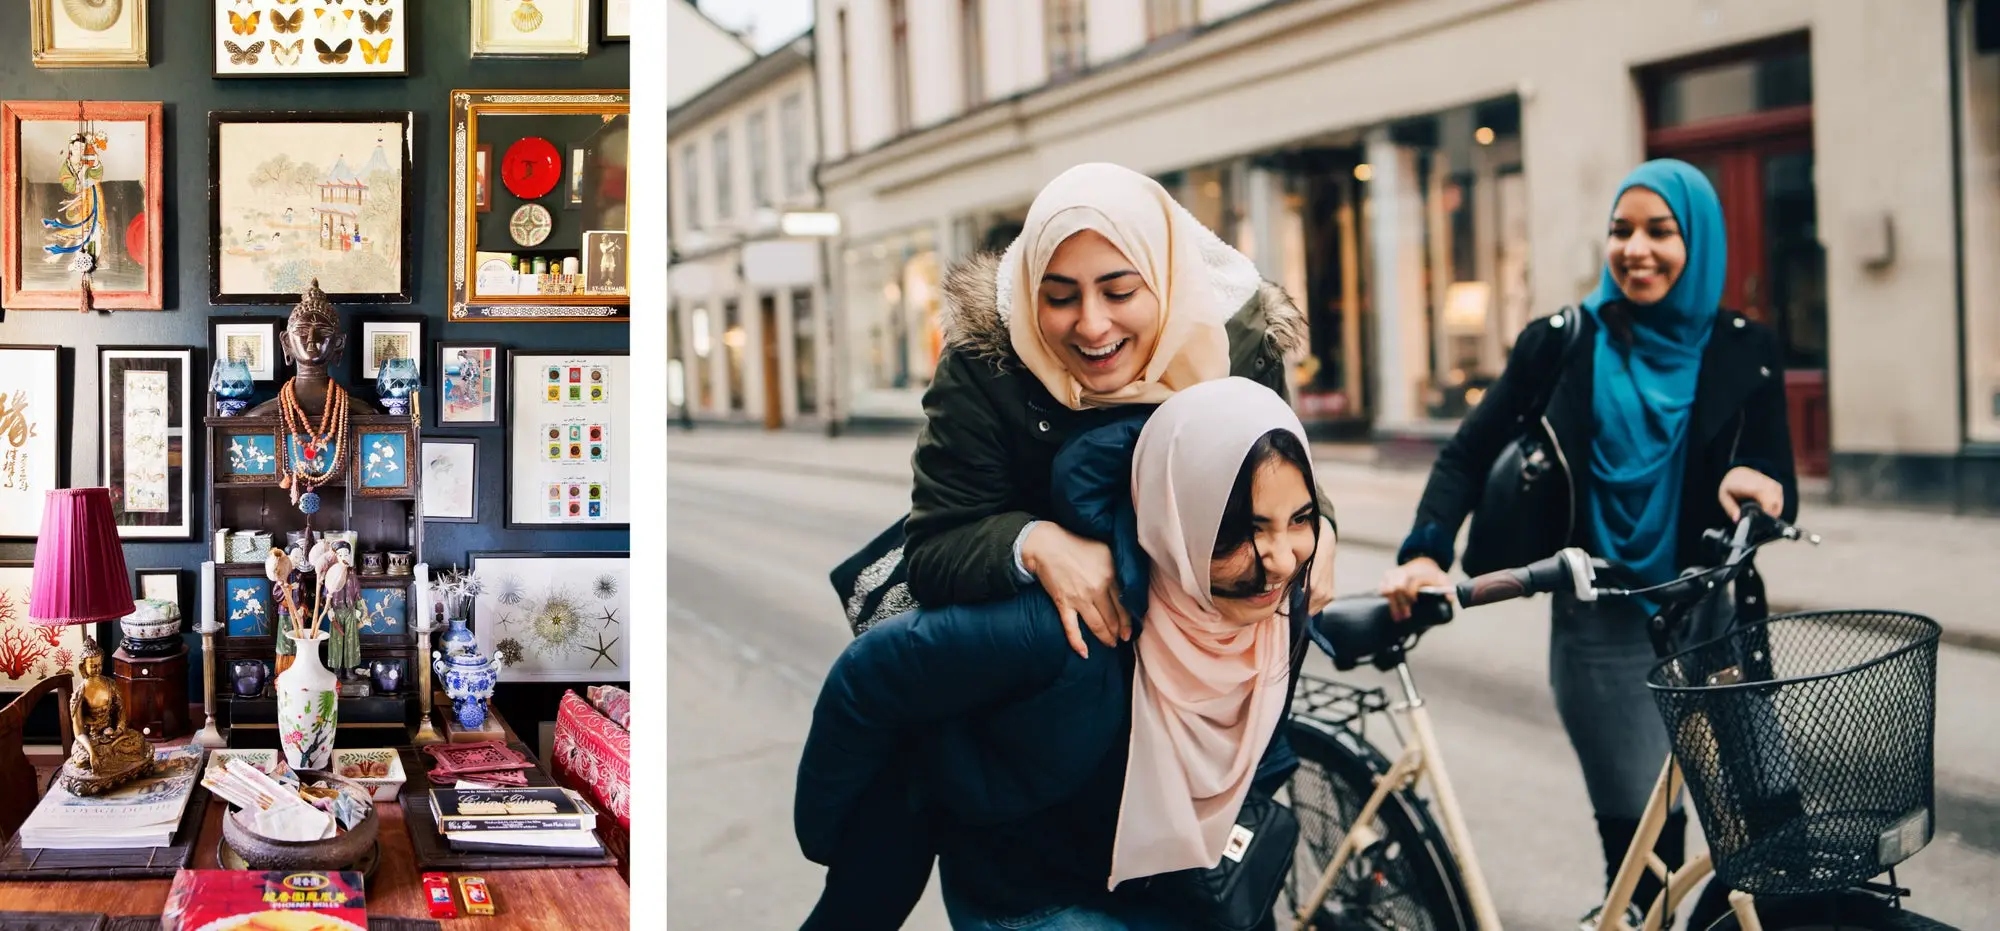 Left image, room filled with eclectic art. Right image, women laughing together walking with a bike. 